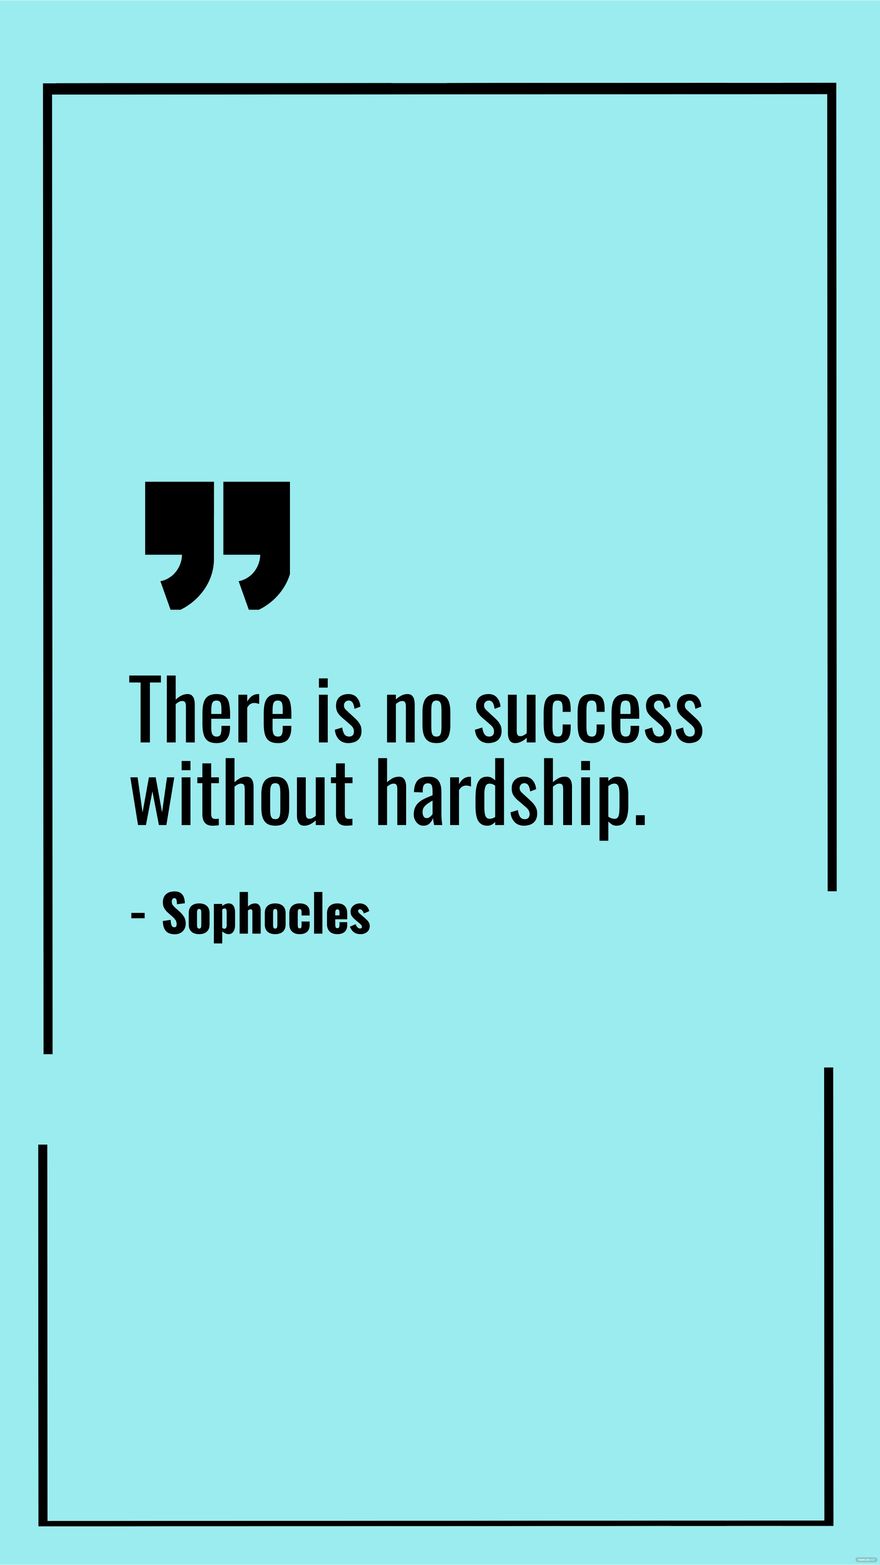 Sophocles - There is no success without hardship.